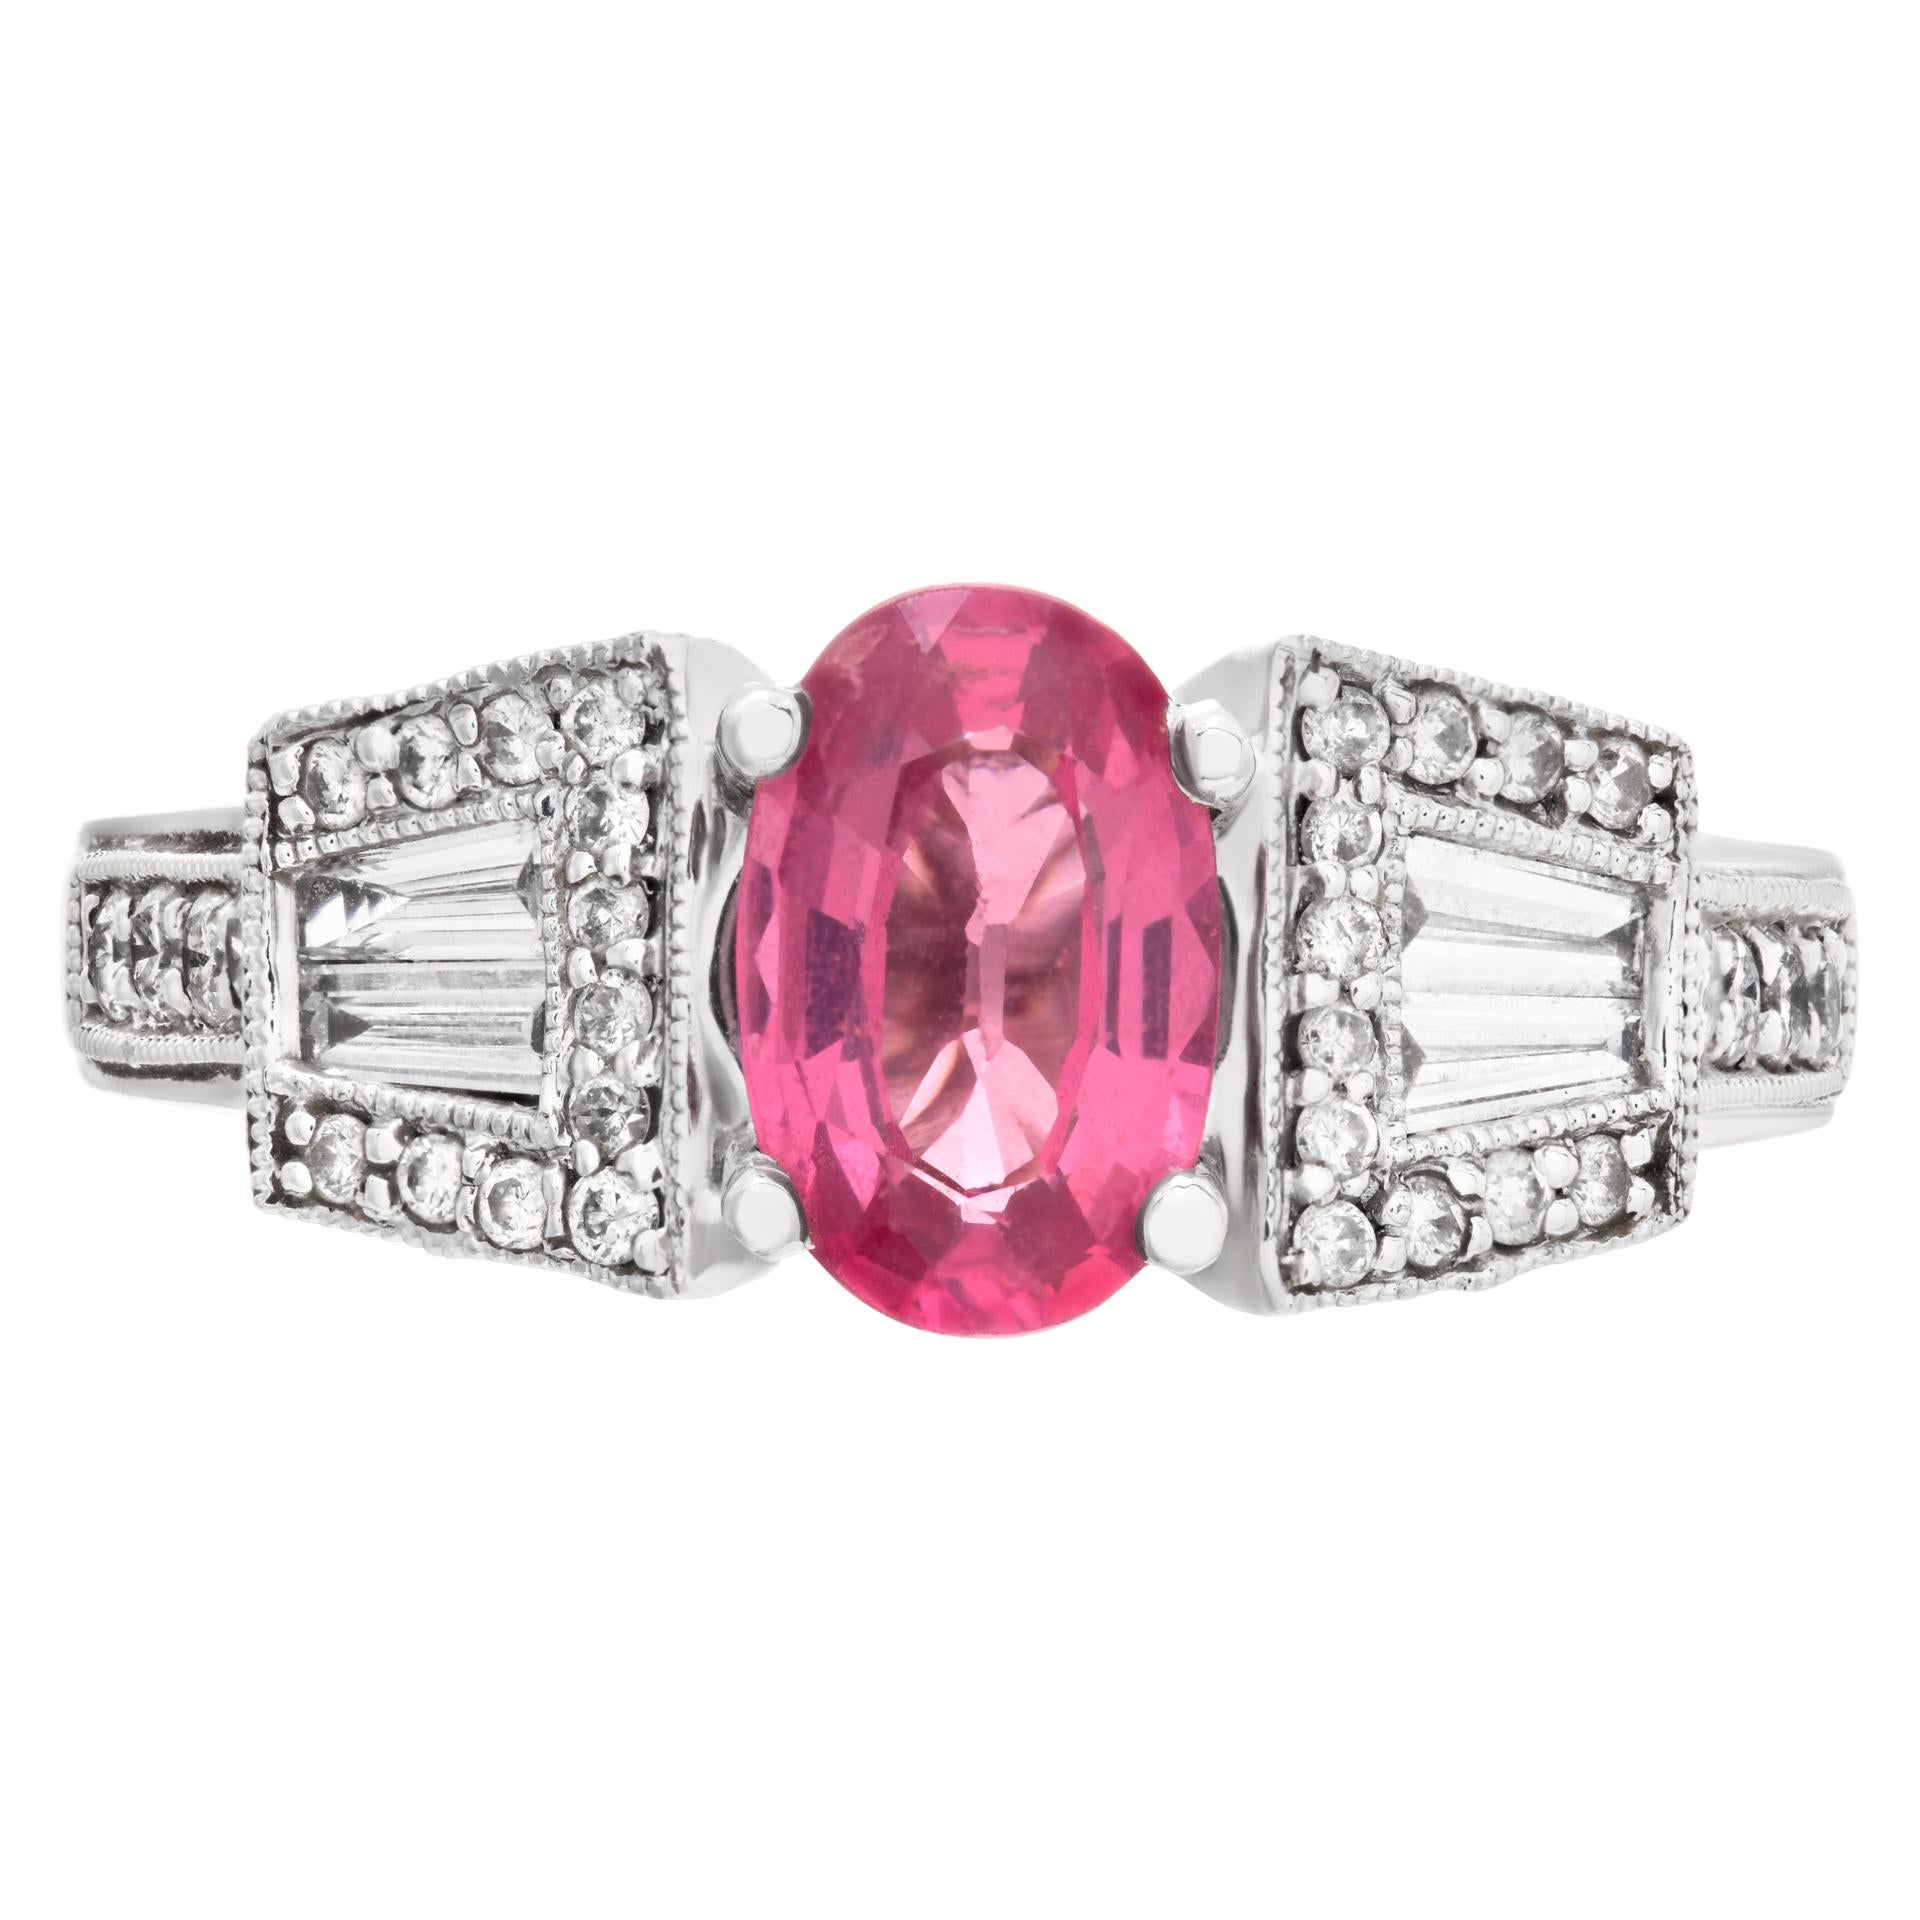 Pretty in Pink! Oval brilliant cut pink Spinel (approx. 2 carats) & diamonds ring set in 14k white gold. Round brilliant and baguette cut diamonds total approx. weight: 1.28 carat, estimate: G-H color, VS clarity. 8mm h x 20mm wide.Size 6.This